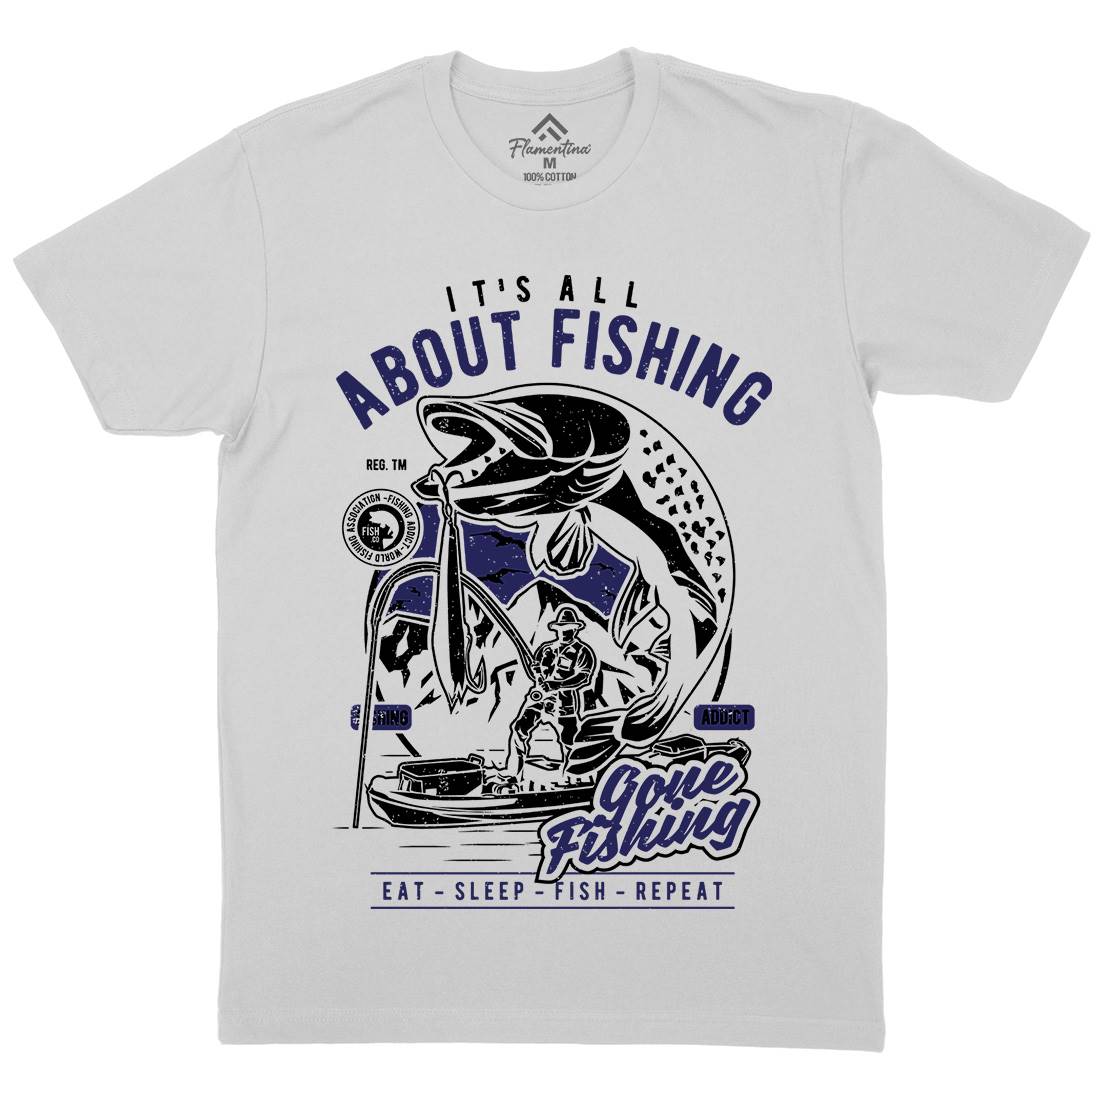 All About Mens Crew Neck T-Shirt Fishing A604